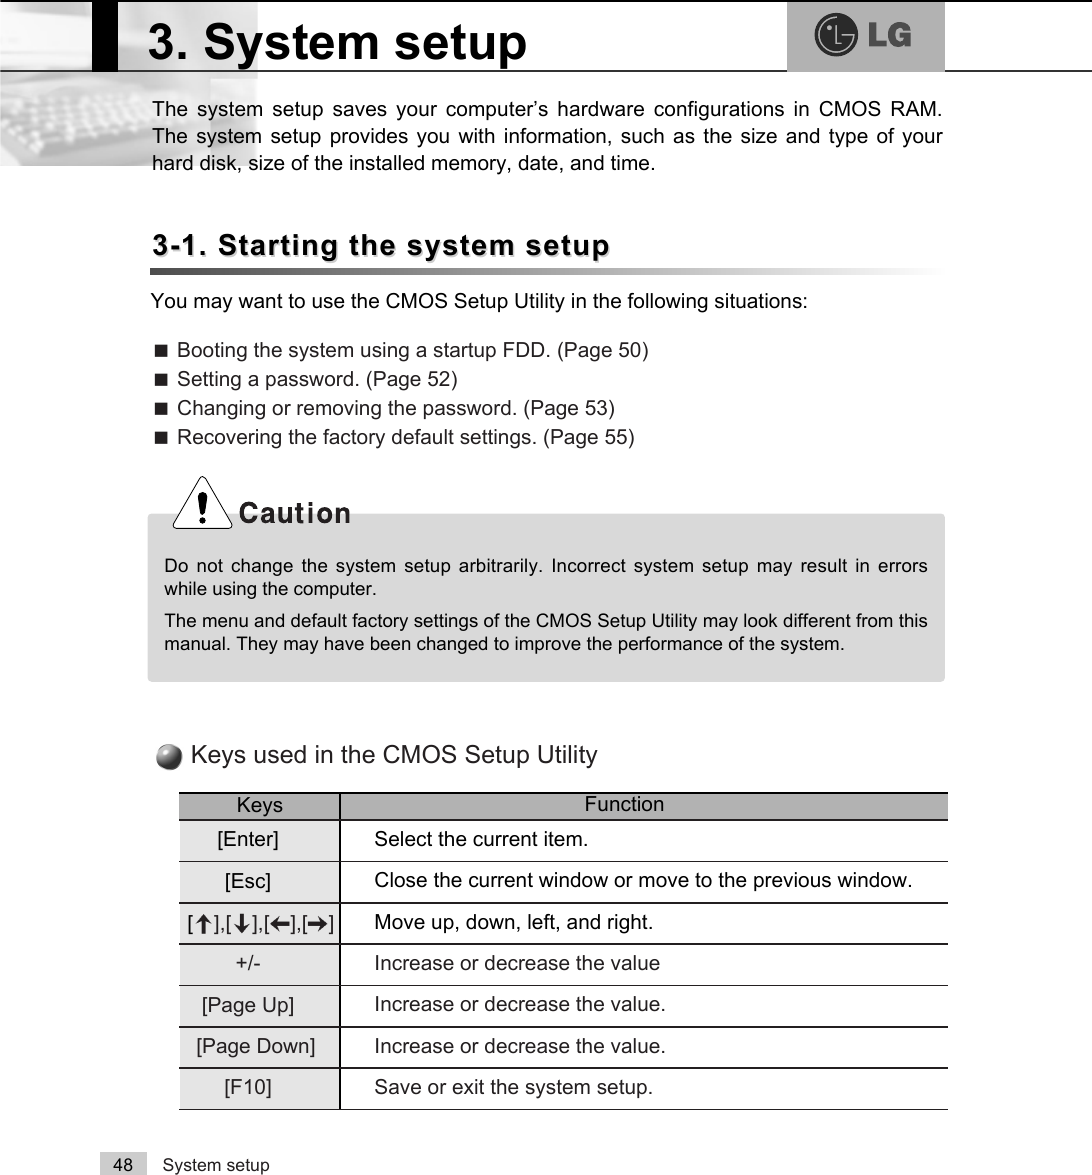 System setup48The system setup saves your computer’s hardware configurations in CMOS RAM.The system setup provides you with information, such as the size and type of yourhard disk, size of the installed memory, date, and time.3-1. Starting the system setup3-1. Starting the system setupYou may want to use the CMOS Setup Utility in the following situations:ãBooting the system using a startup FDD. (Page 50)ãSetting a password. (Page 52)ãChanging or removing the password. (Page 53)ãRecovering the factory default settings. (Page 55)Do not change the system setup arbitrarily. Incorrect system setup may result in errorswhile using the computer.The menu and default factory settings of the CMOS Setup Utility may look different from thismanual. They may have been changed to improve the performance of the system.3. System setupKeys FunctionSelect the current item.[Enter]Close the current window or move to the previous window.[Esc]Move up, down, left, and right.[Ⓑ],[Ⓒ],[⒵],[Ⓐ]Increase or decrease the valueIncrease or decrease the value.Increase or decrease the value.Save or exit the system setup.+/-[Page Up][Page Down][F10]Keys used in the CMOS Setup Utility